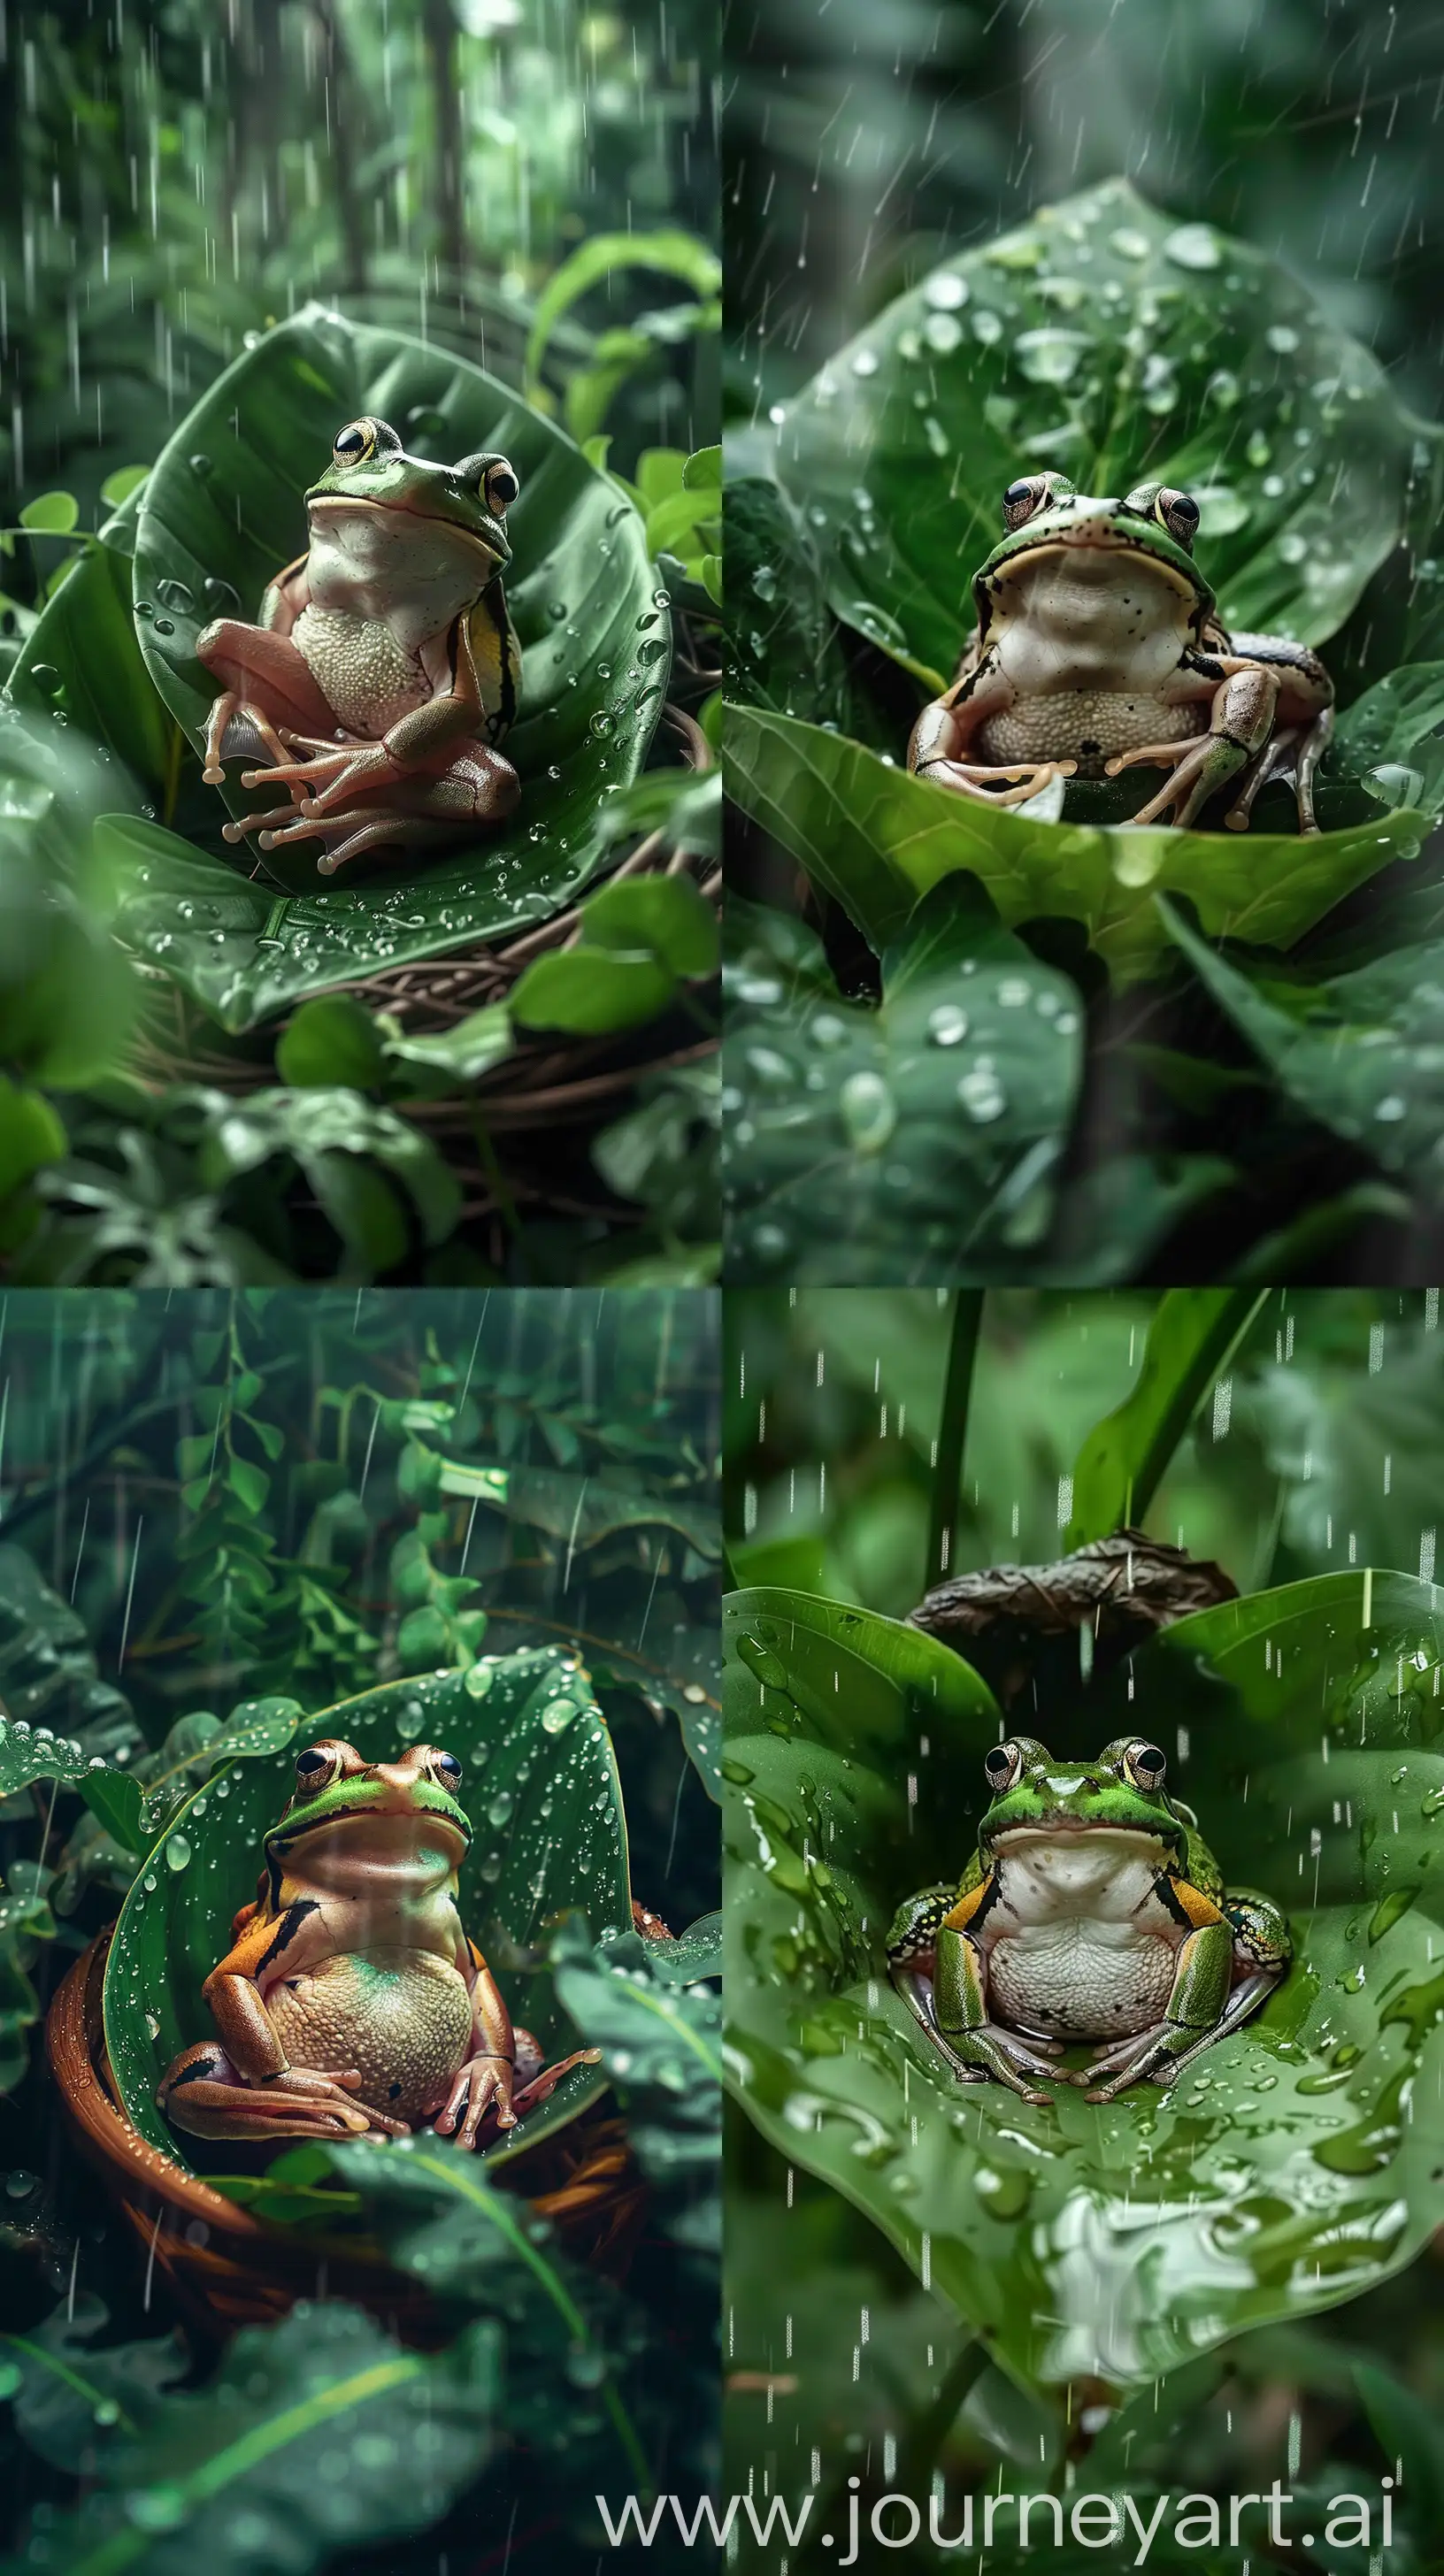 Serenity-in-Rain-Frog-on-Leaf-Amidst-Verdant-Forest-HighQuality-8K-Image